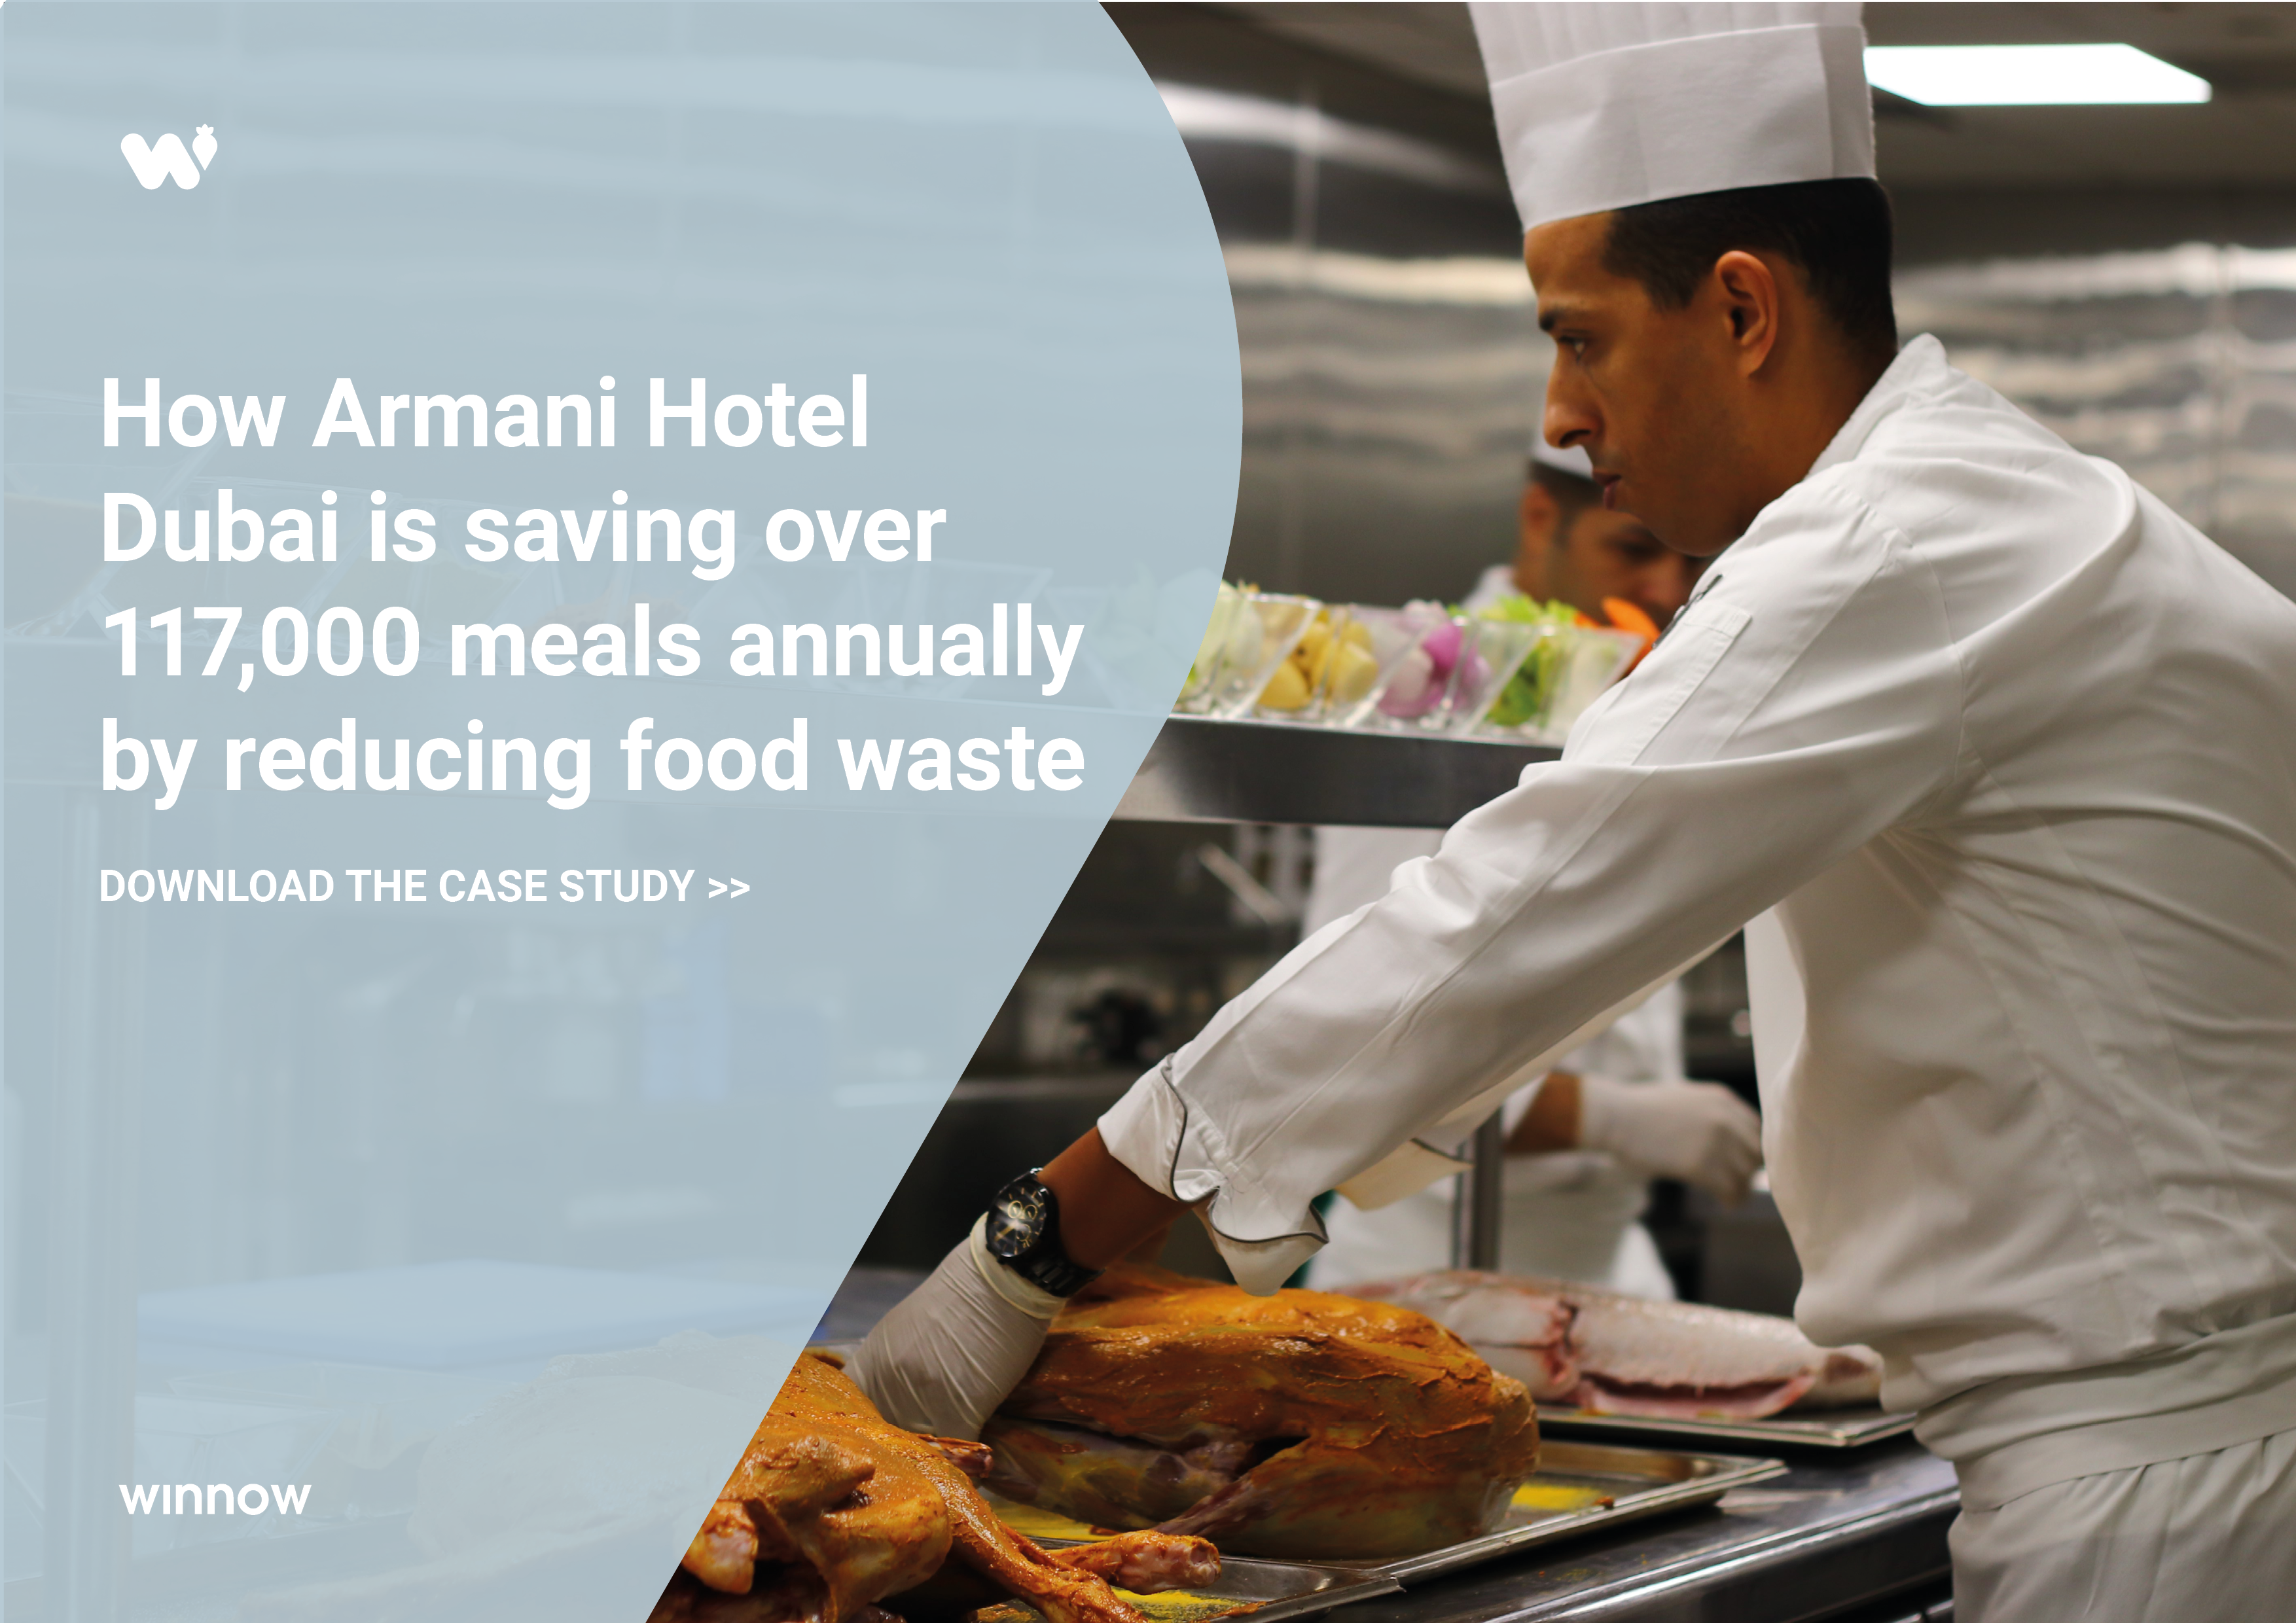 Image for landing page_armani hotel